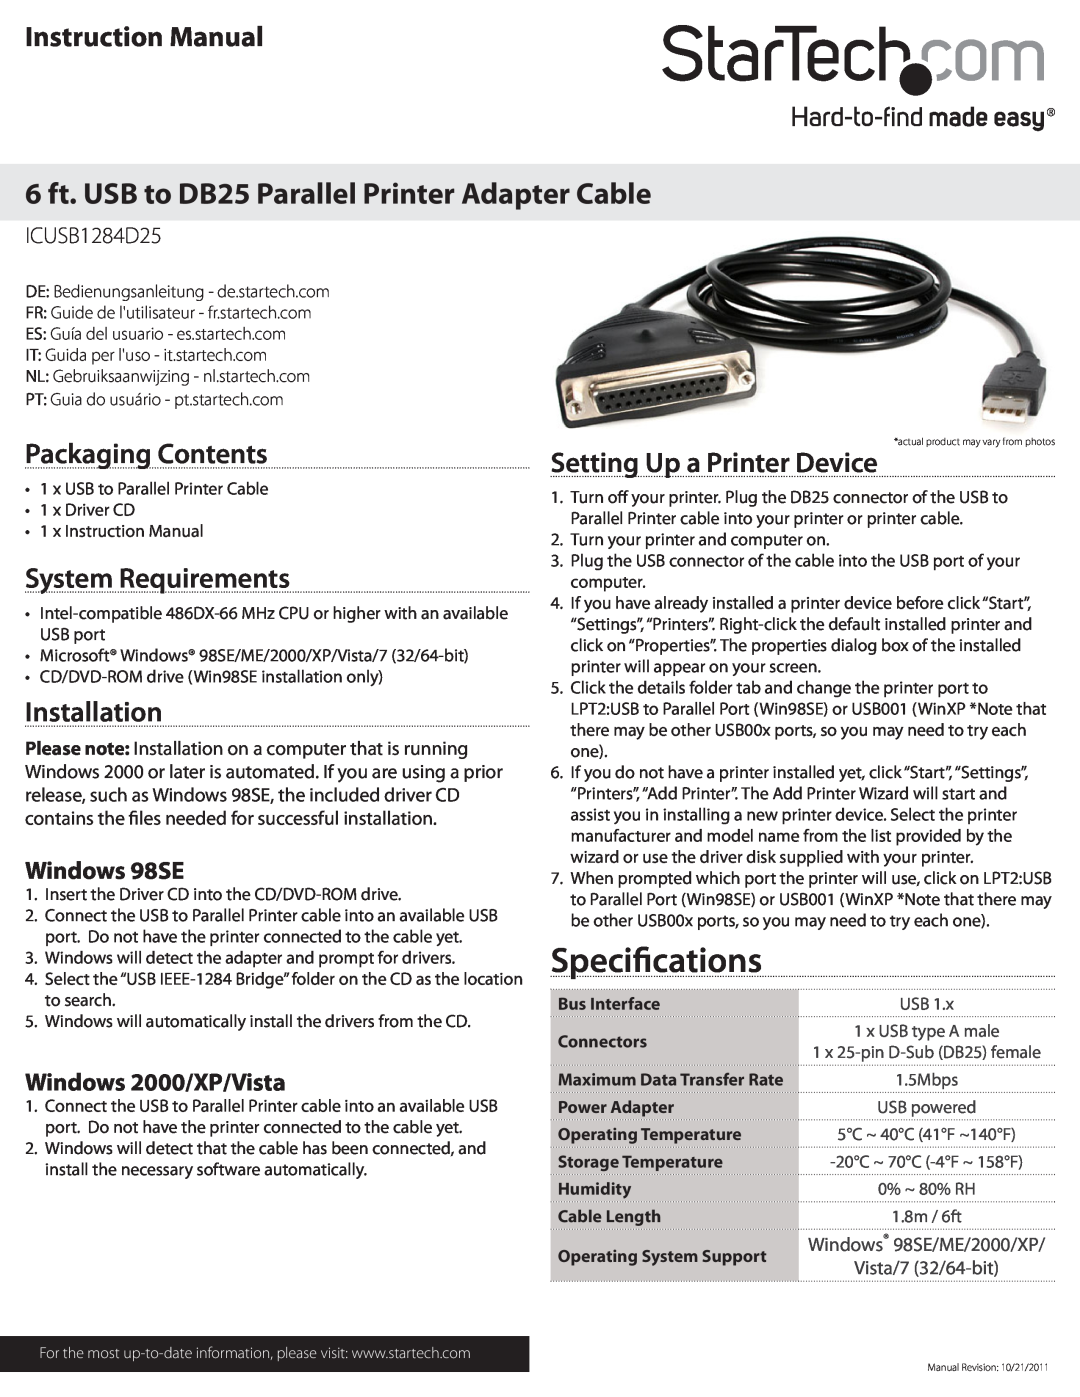 StarTech.com ICUSB1284D25 instruction manual Specifications, 6 ft. USB to DB25 Parallel Printer Adapter Cable, Connectors 